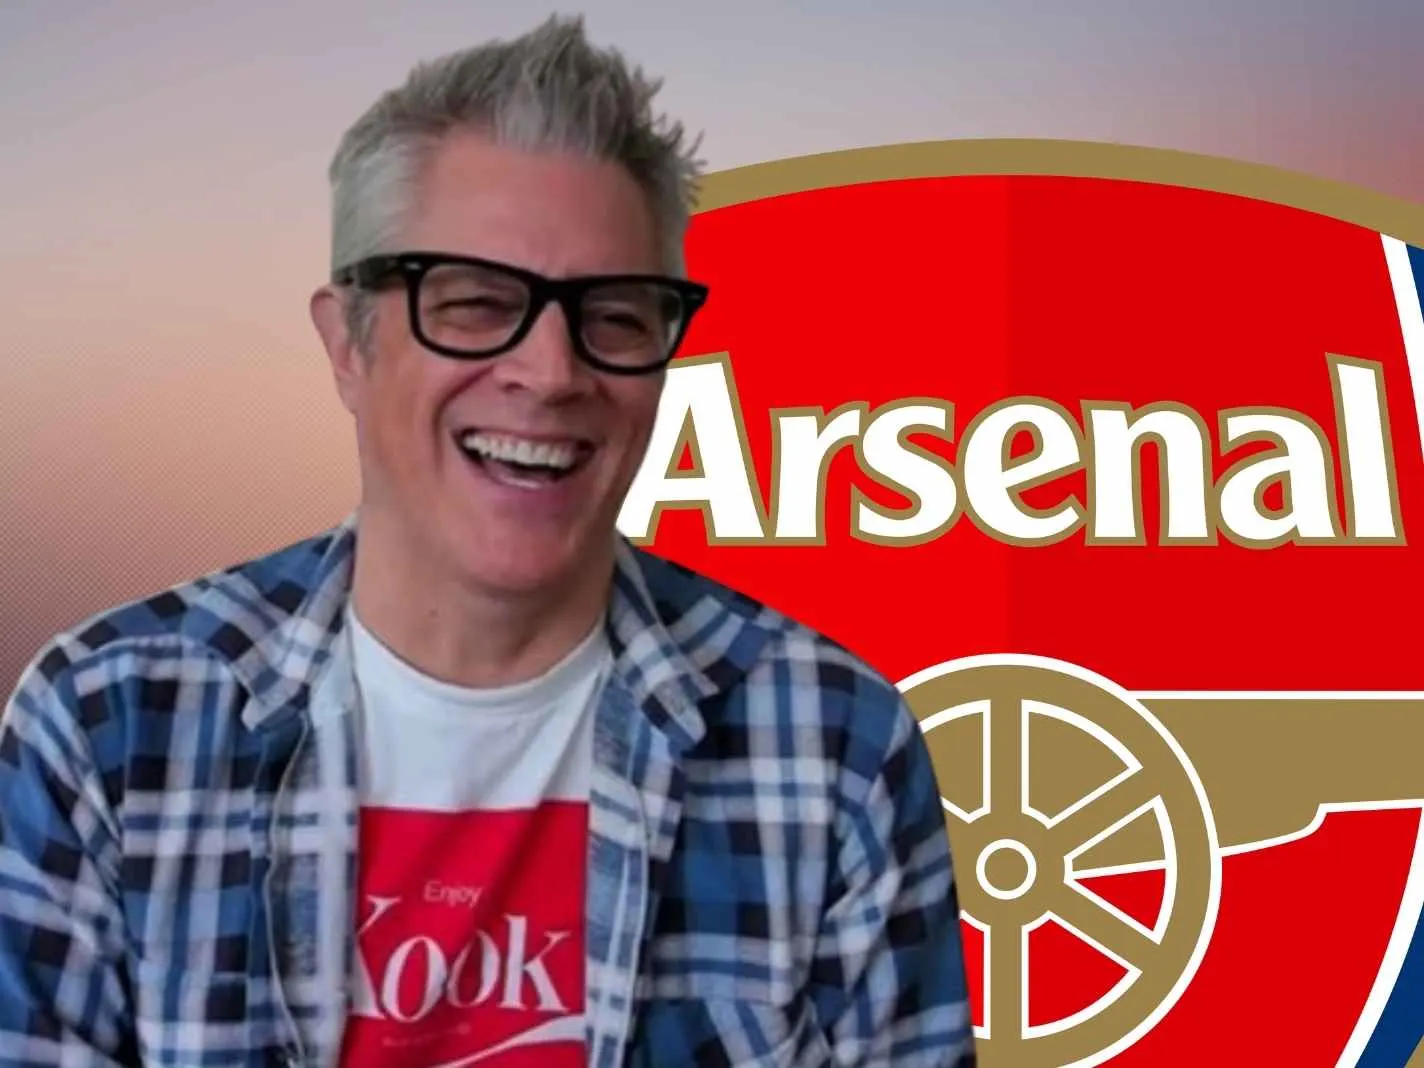 Jackass star Johnny Knoxville might be an Arsenal fan